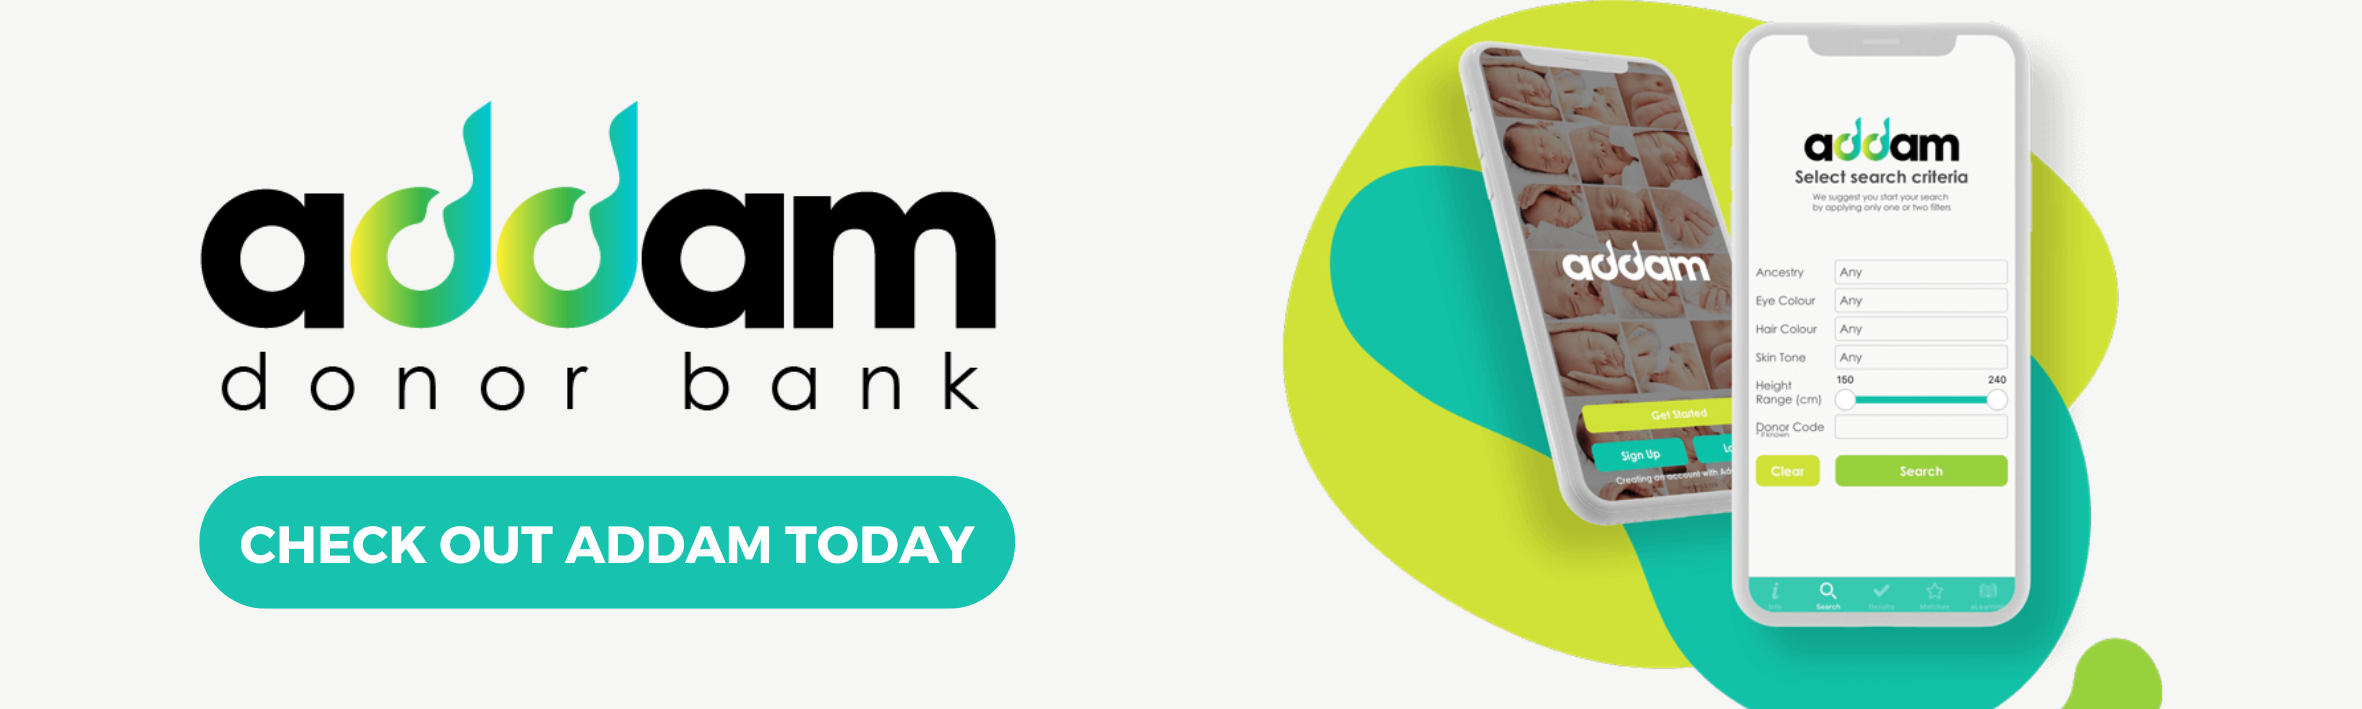 Addam Donor Bank logo with image of Addam Donor Bank app